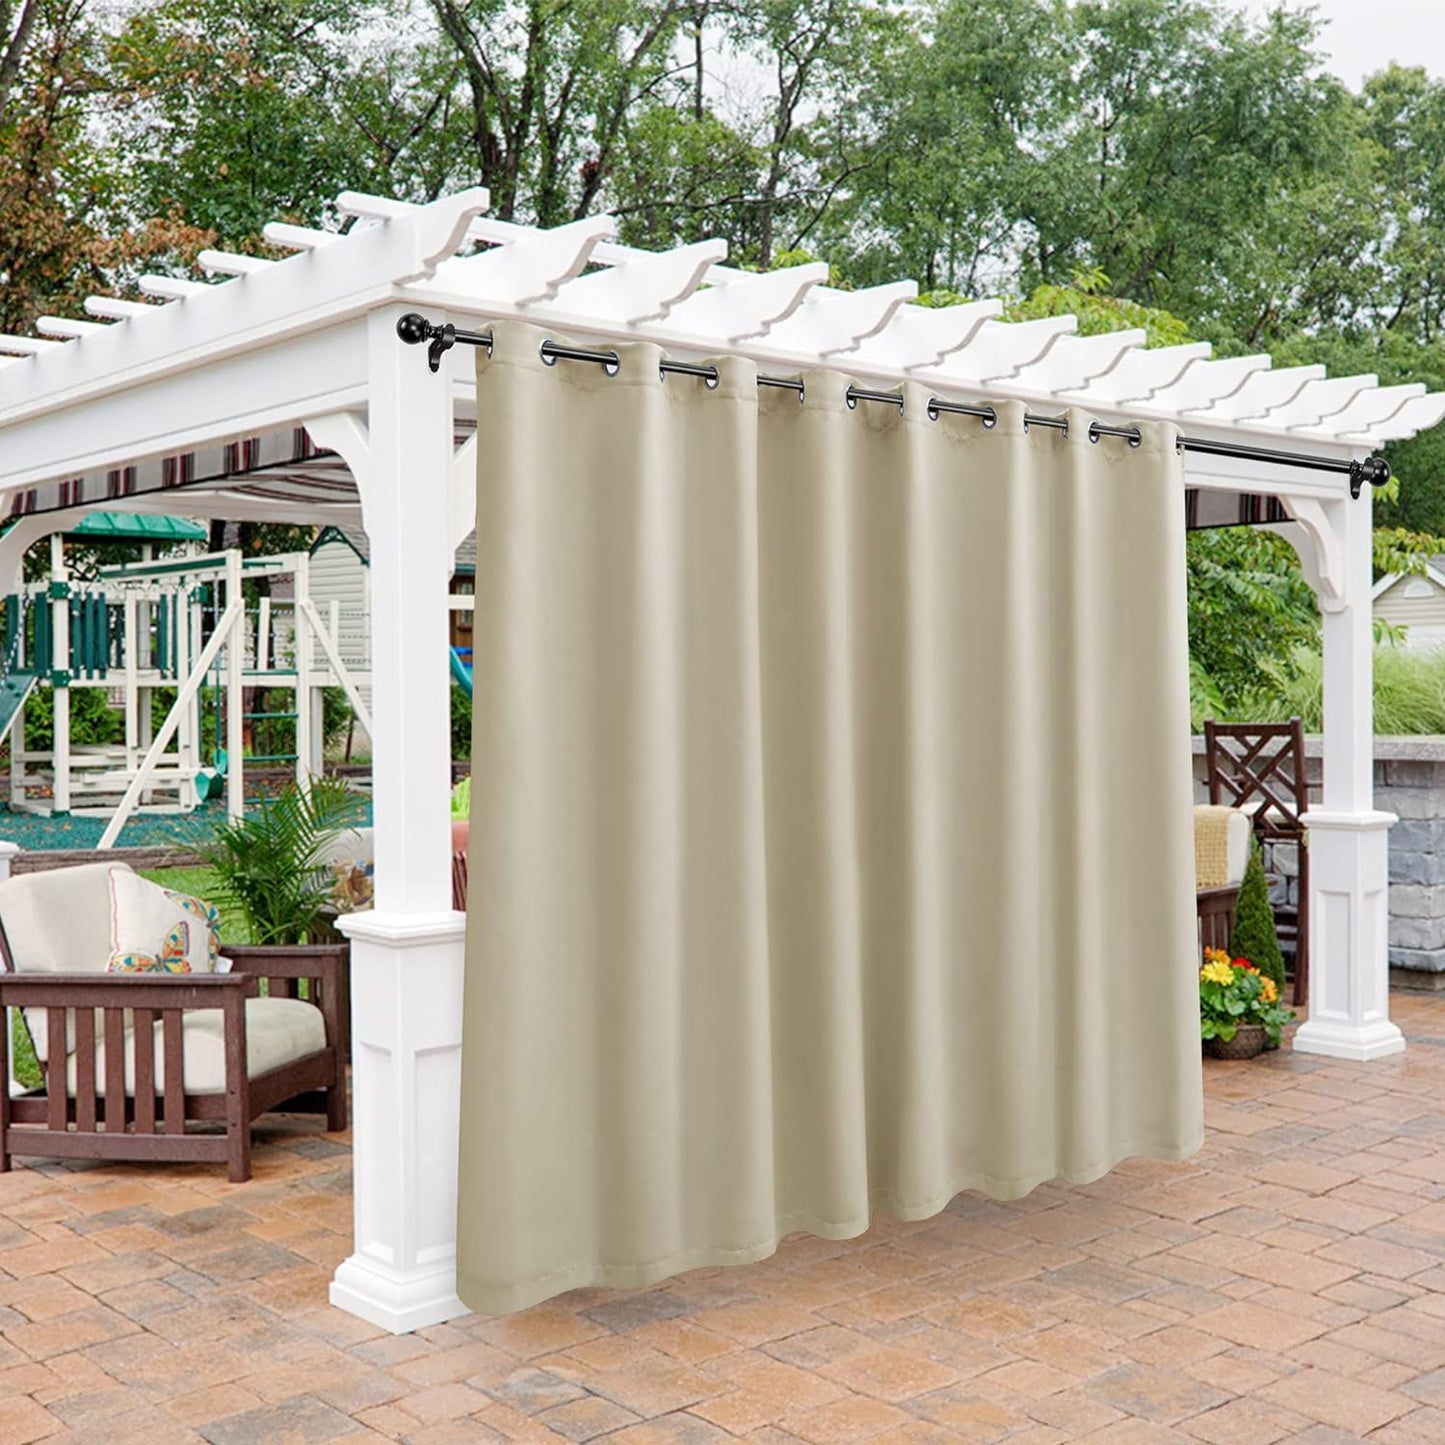 BONZER Outdoor Curtains for Patio Waterproof - Light Blocking Weather Resistant Privacy Grommet Blackout Curtains for Gazebo, Porch, Pergola, Cabana, Deck, Sunroom, 1 Panel, 52W X 84L Inch, Silver  BONZER Cream 120W X 95 Inch 